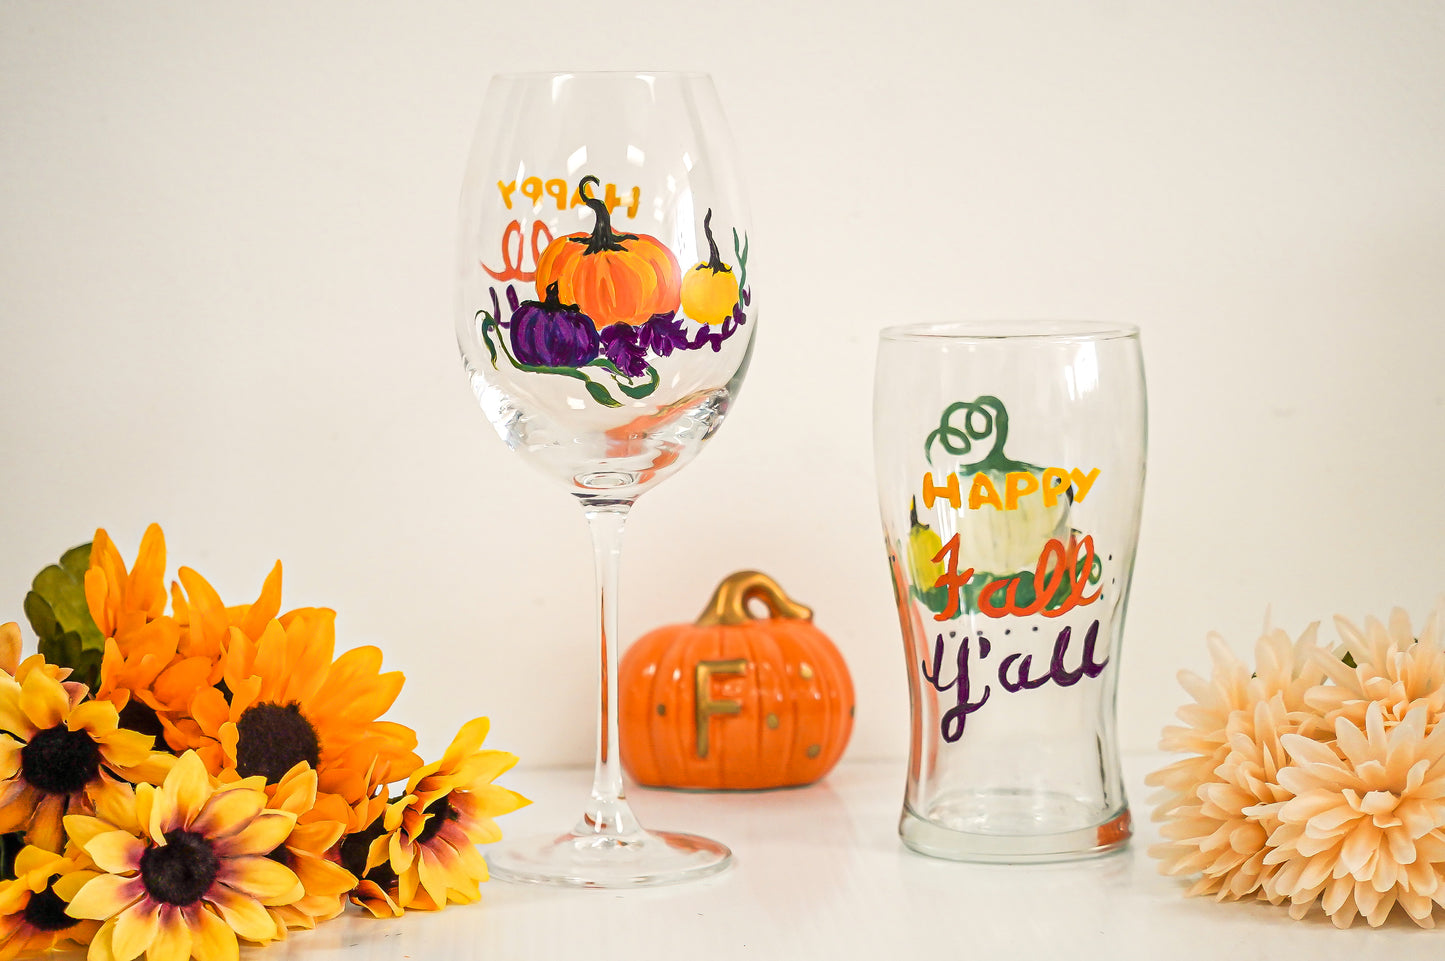 Happy Fall Y'all Paint on Glass Painting Kit by Art Cellar Houston